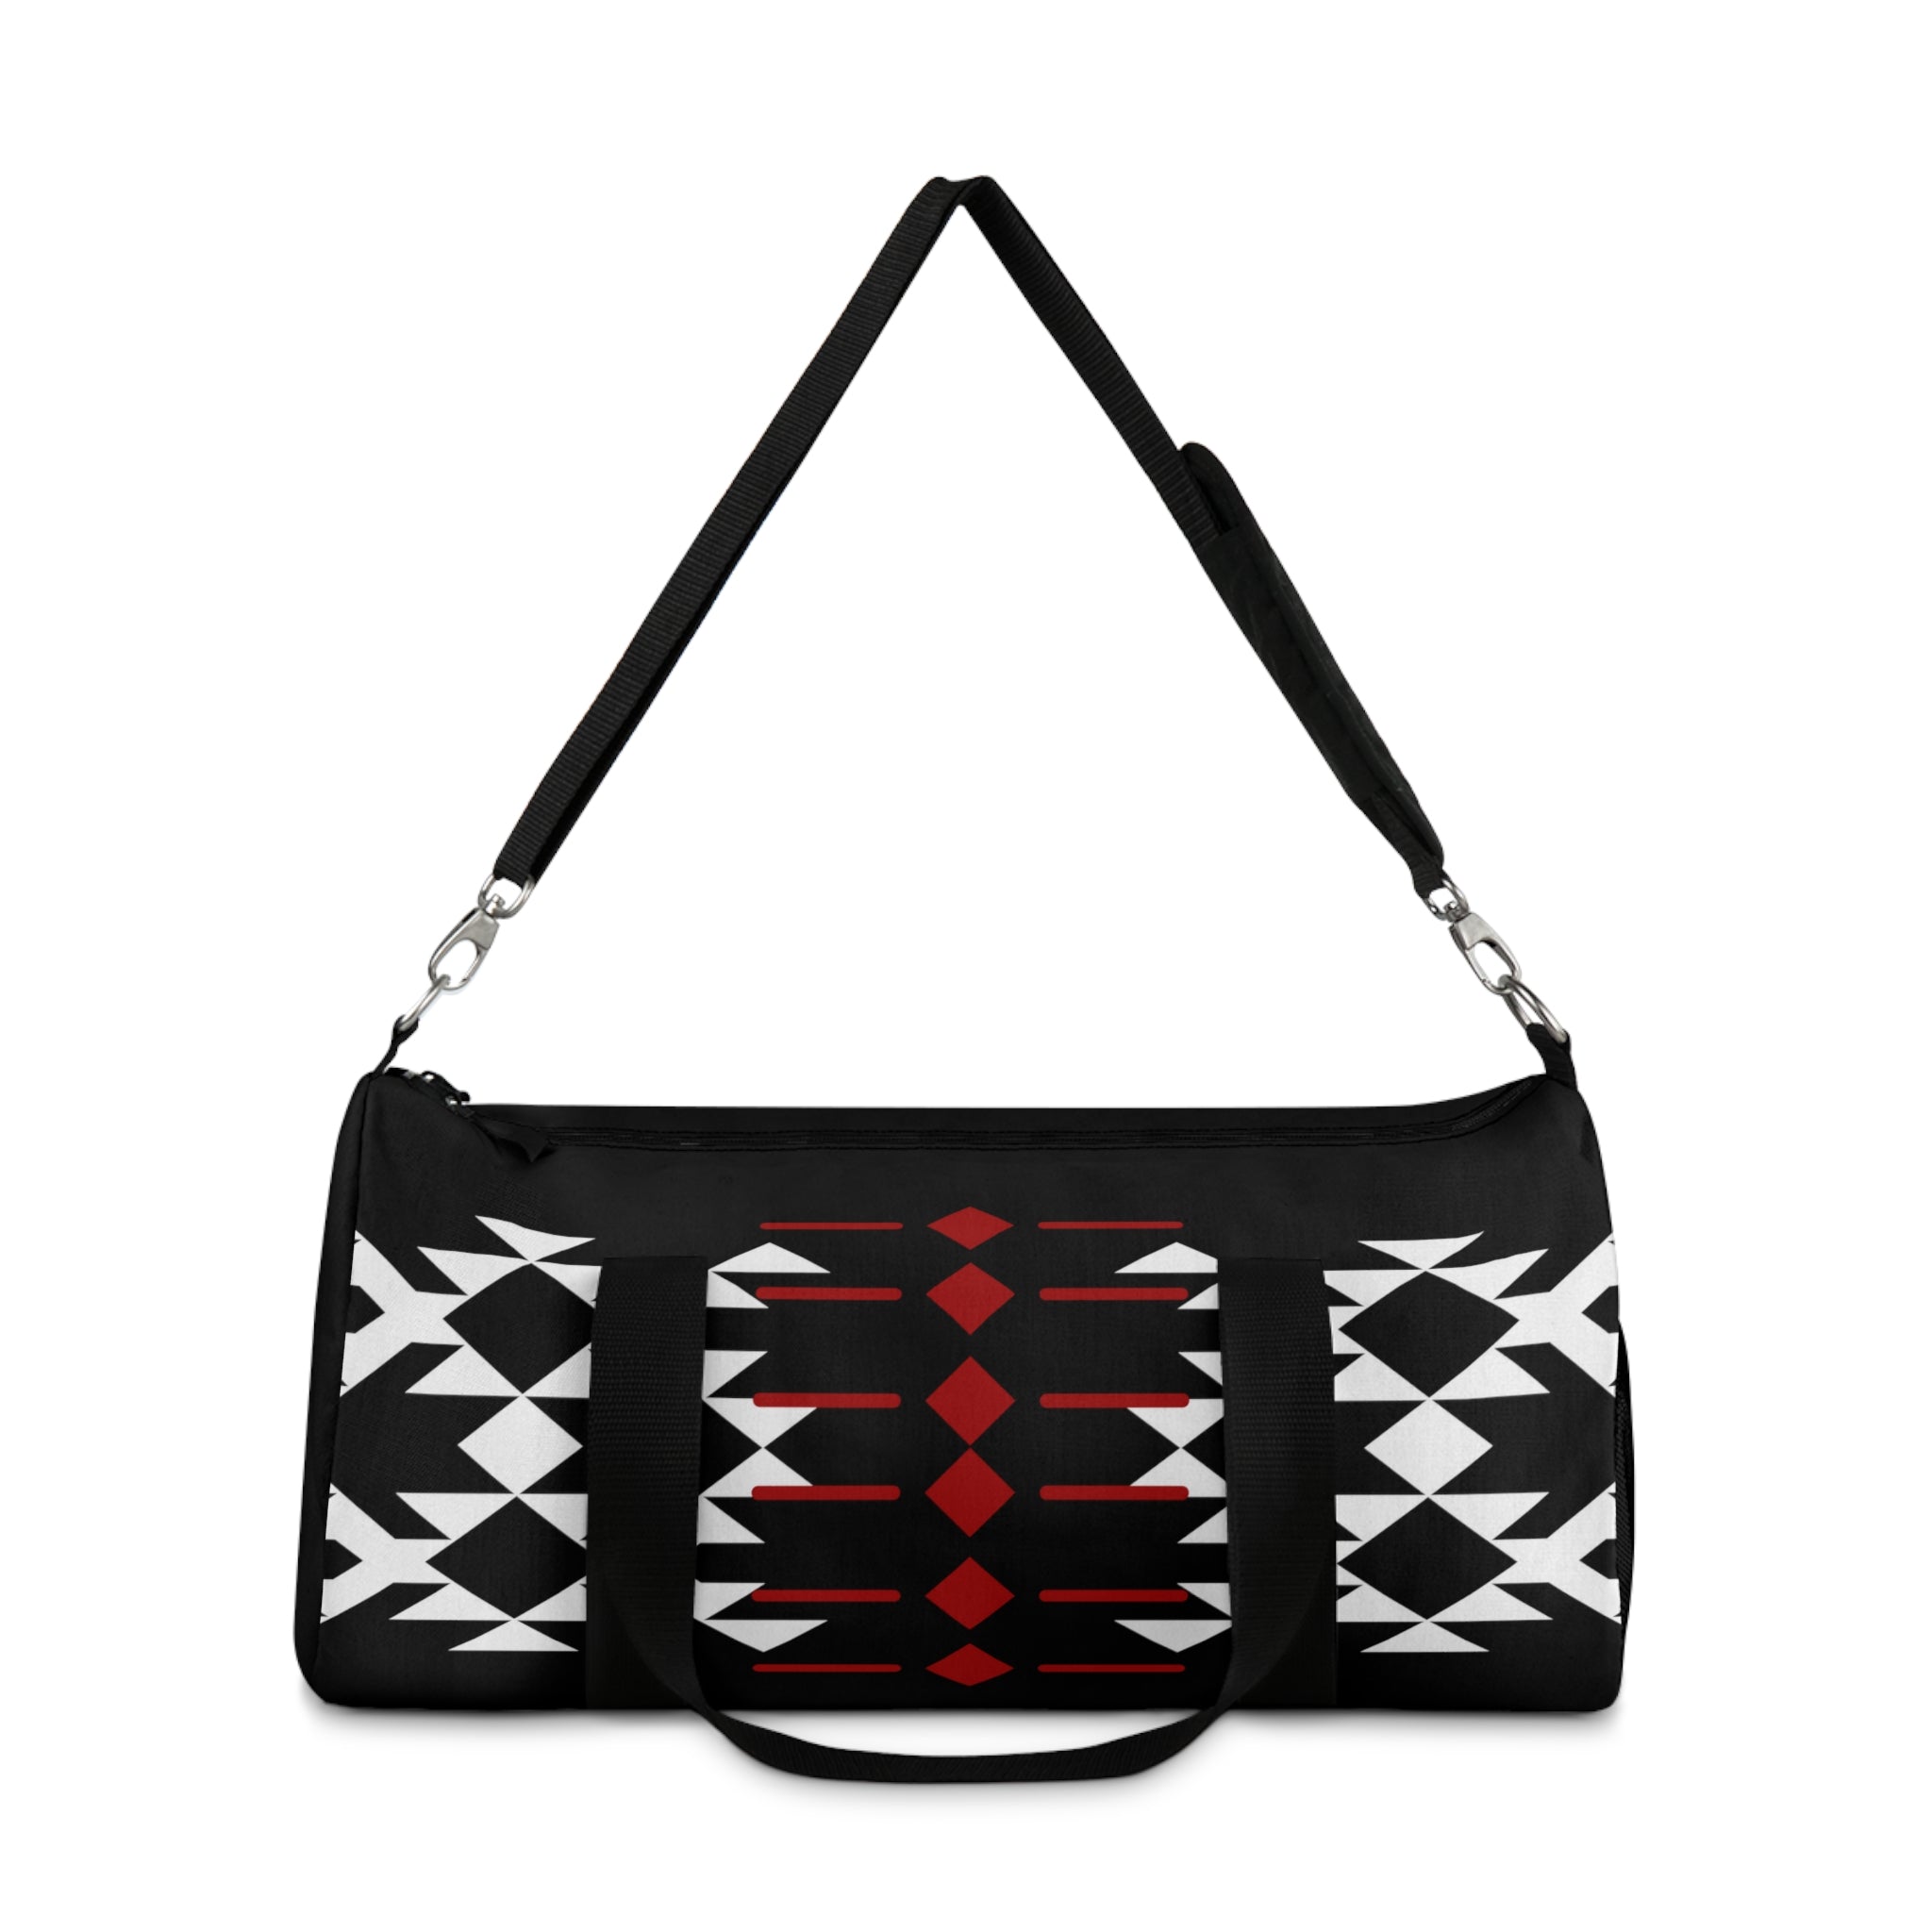 Black, Red, and White Warrior Duffel Bag, Small